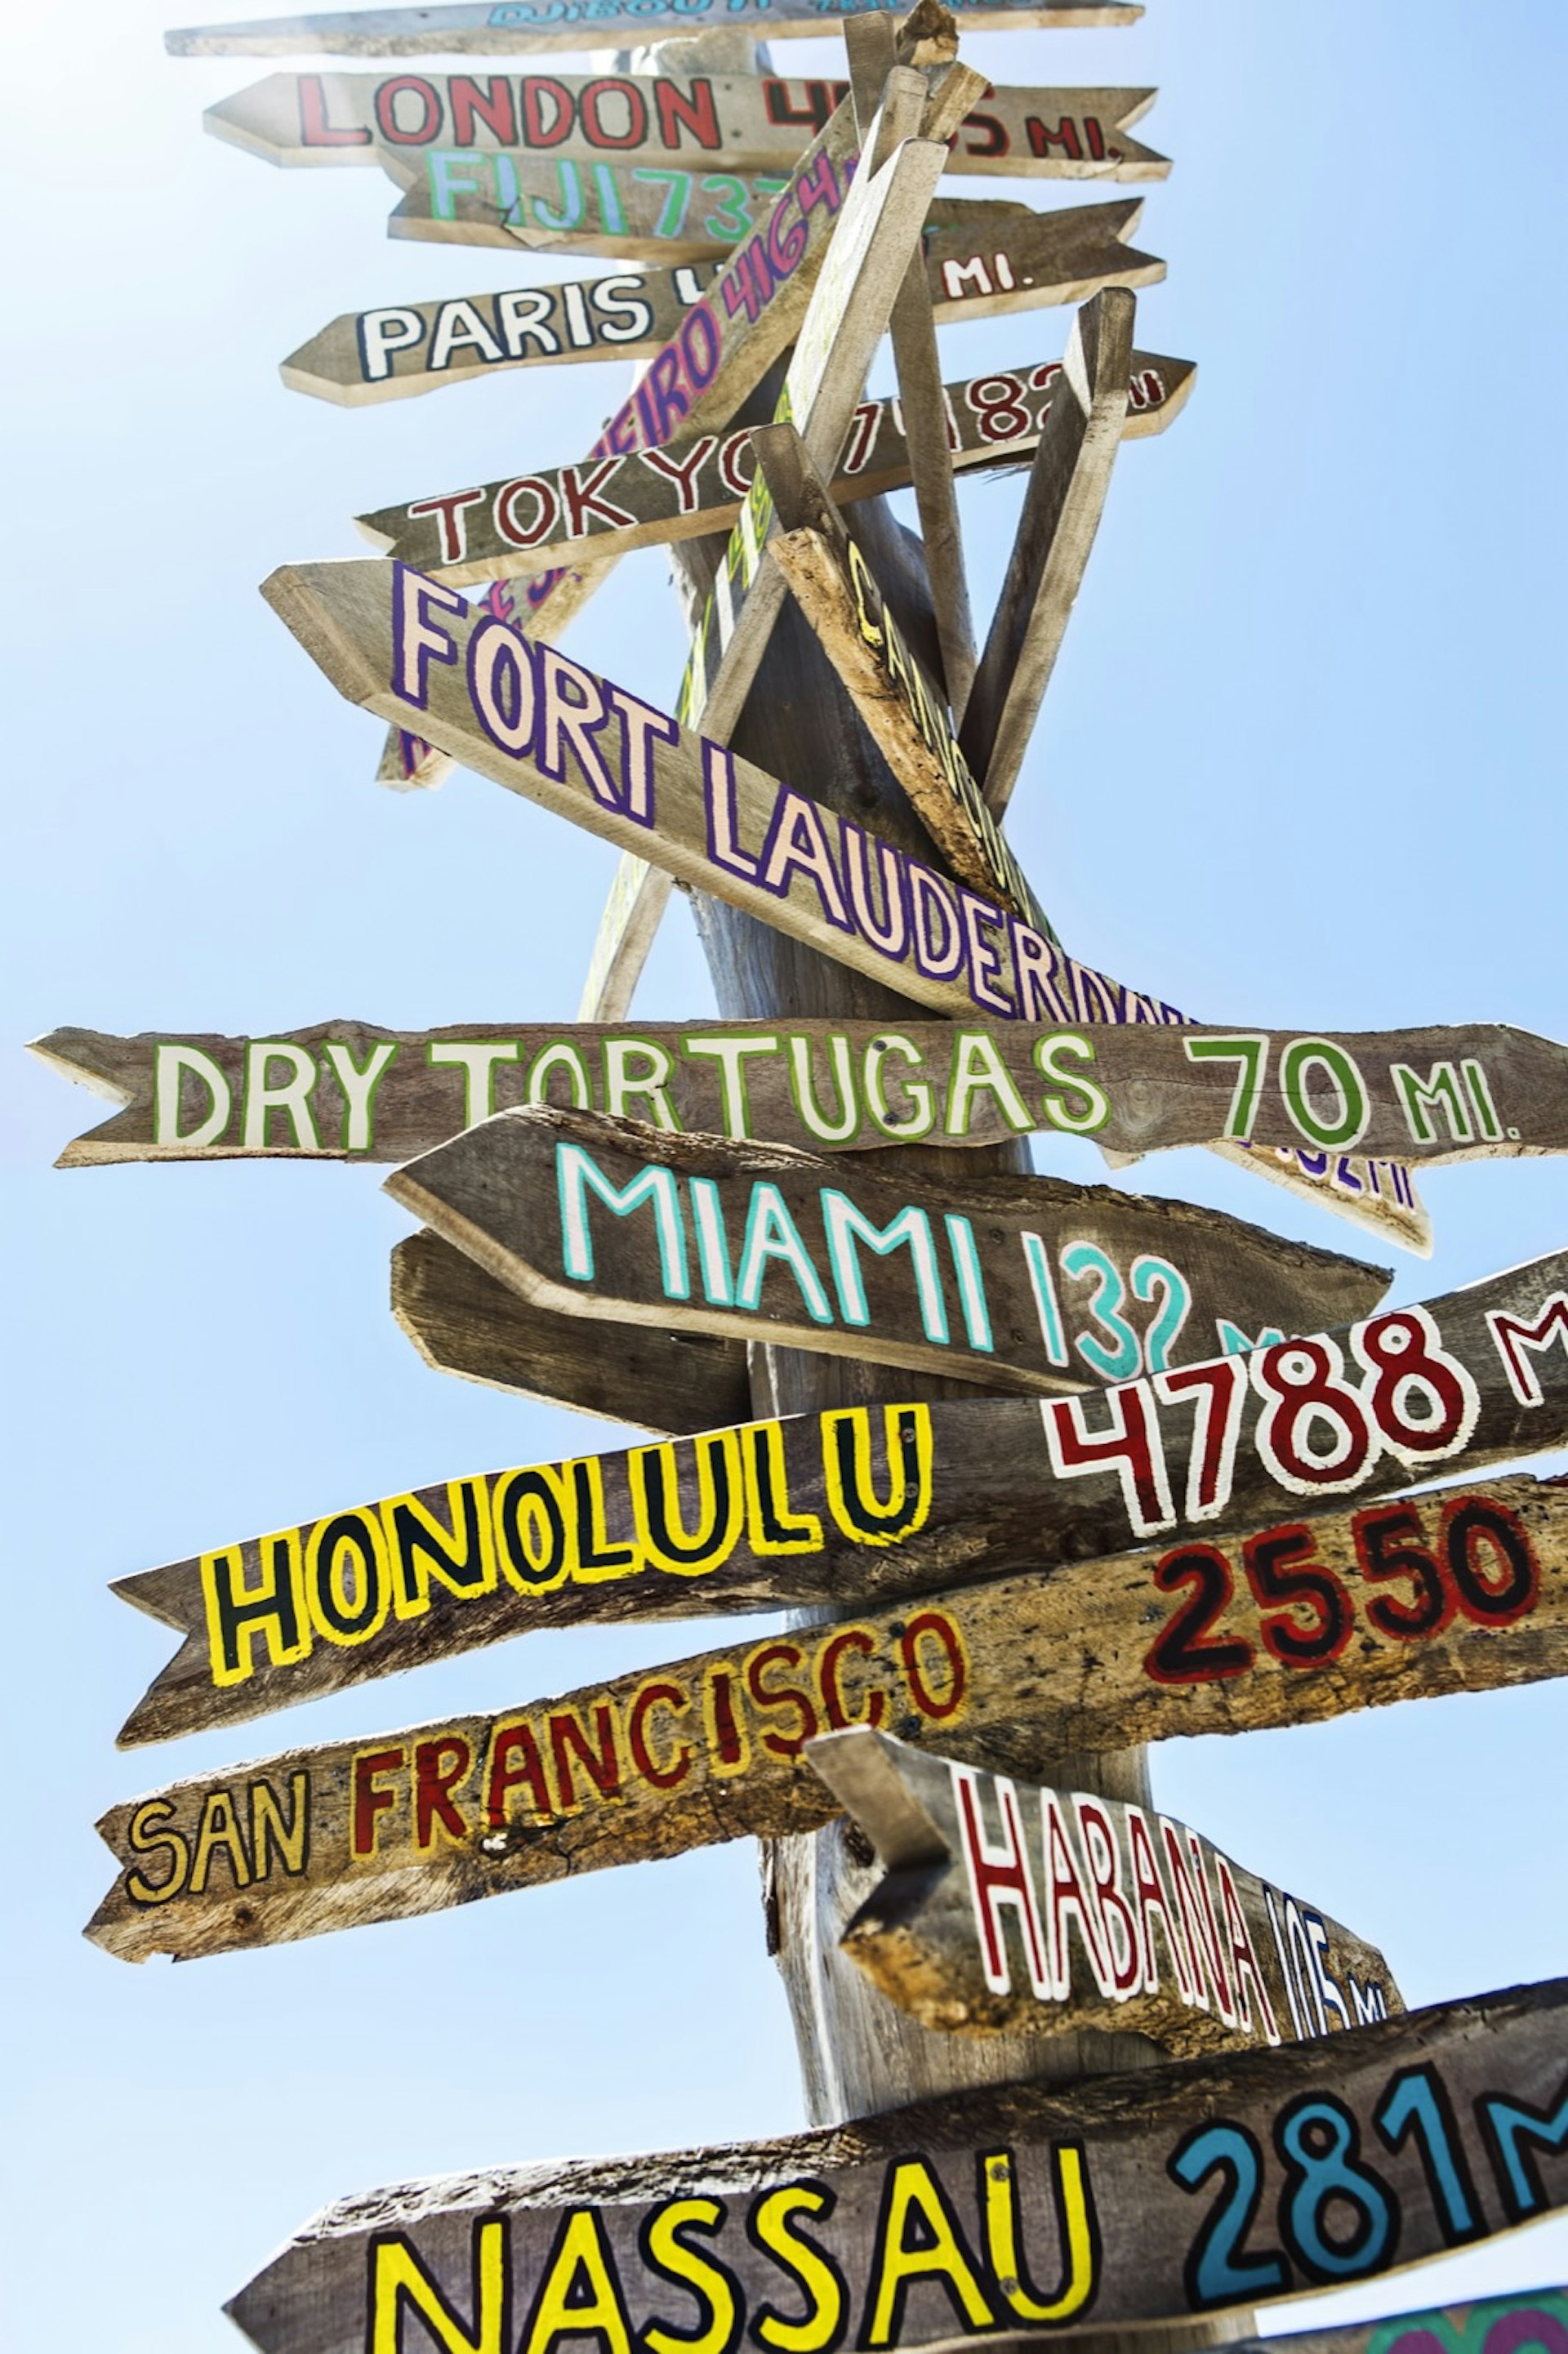 Driftwood signs point the way and show the mileage from Key West to Miami, Honolulu, Dry Tortugas and Havana